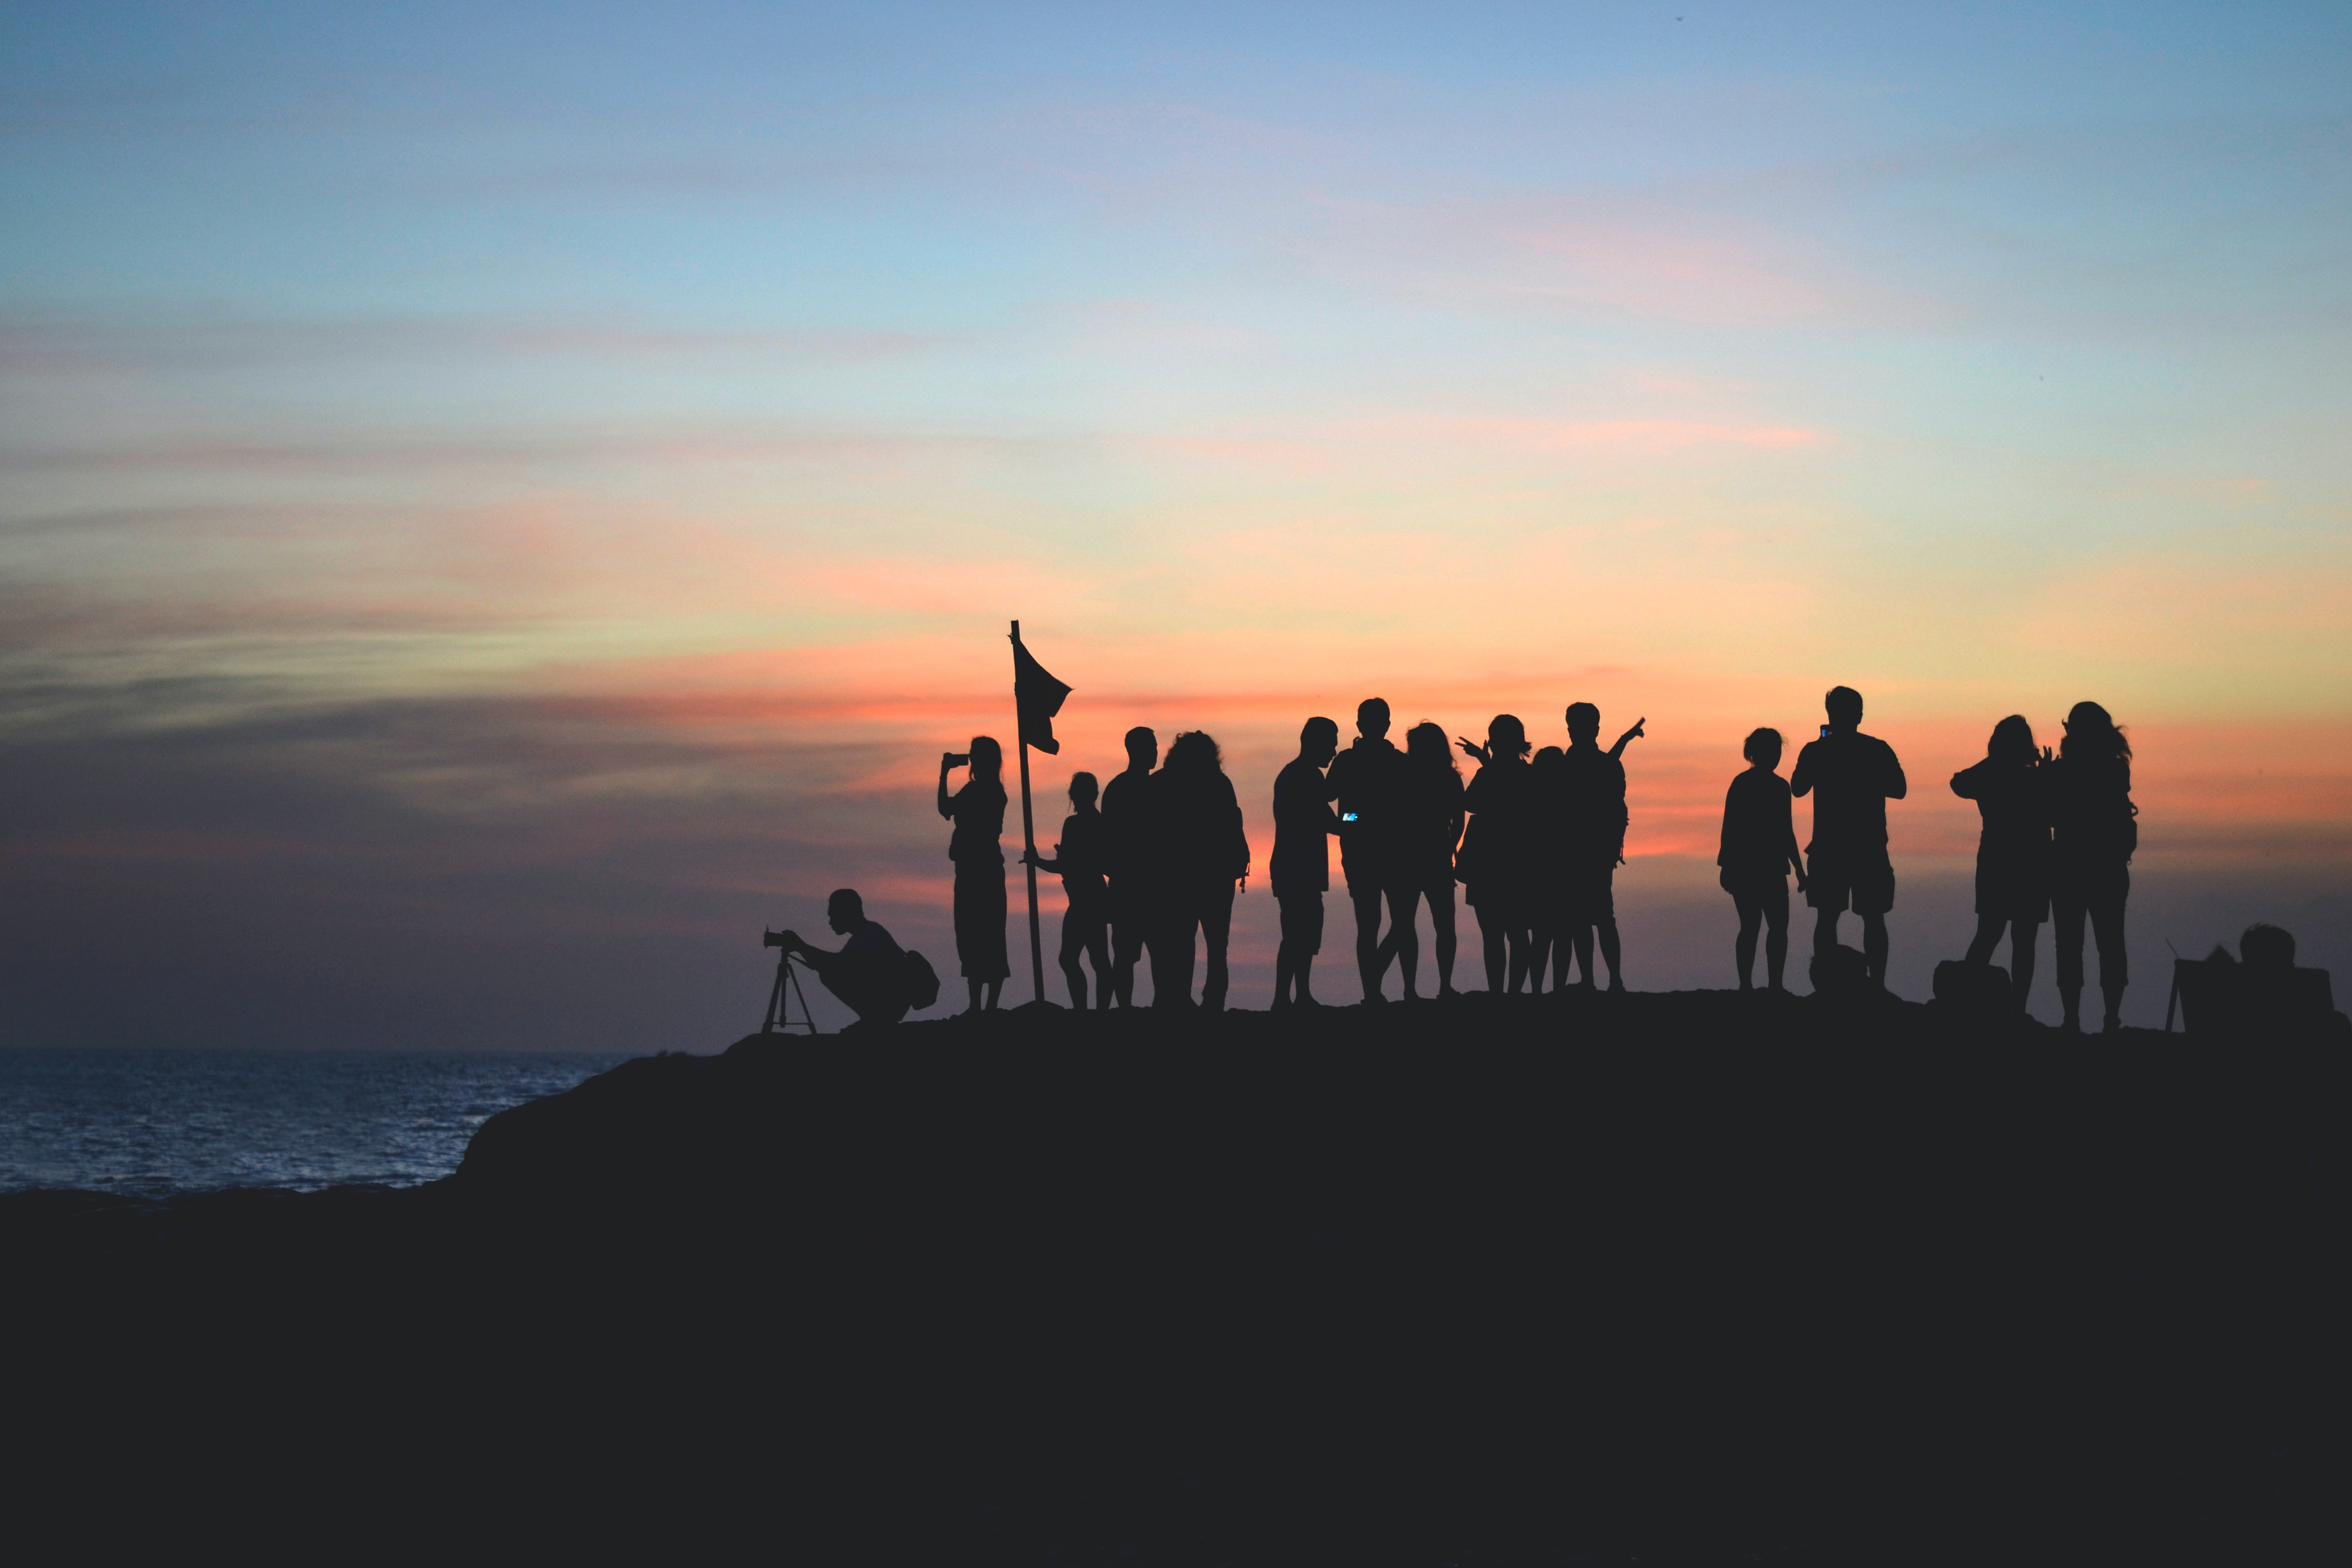 group of people standing on a hill silhouetted by the sunset